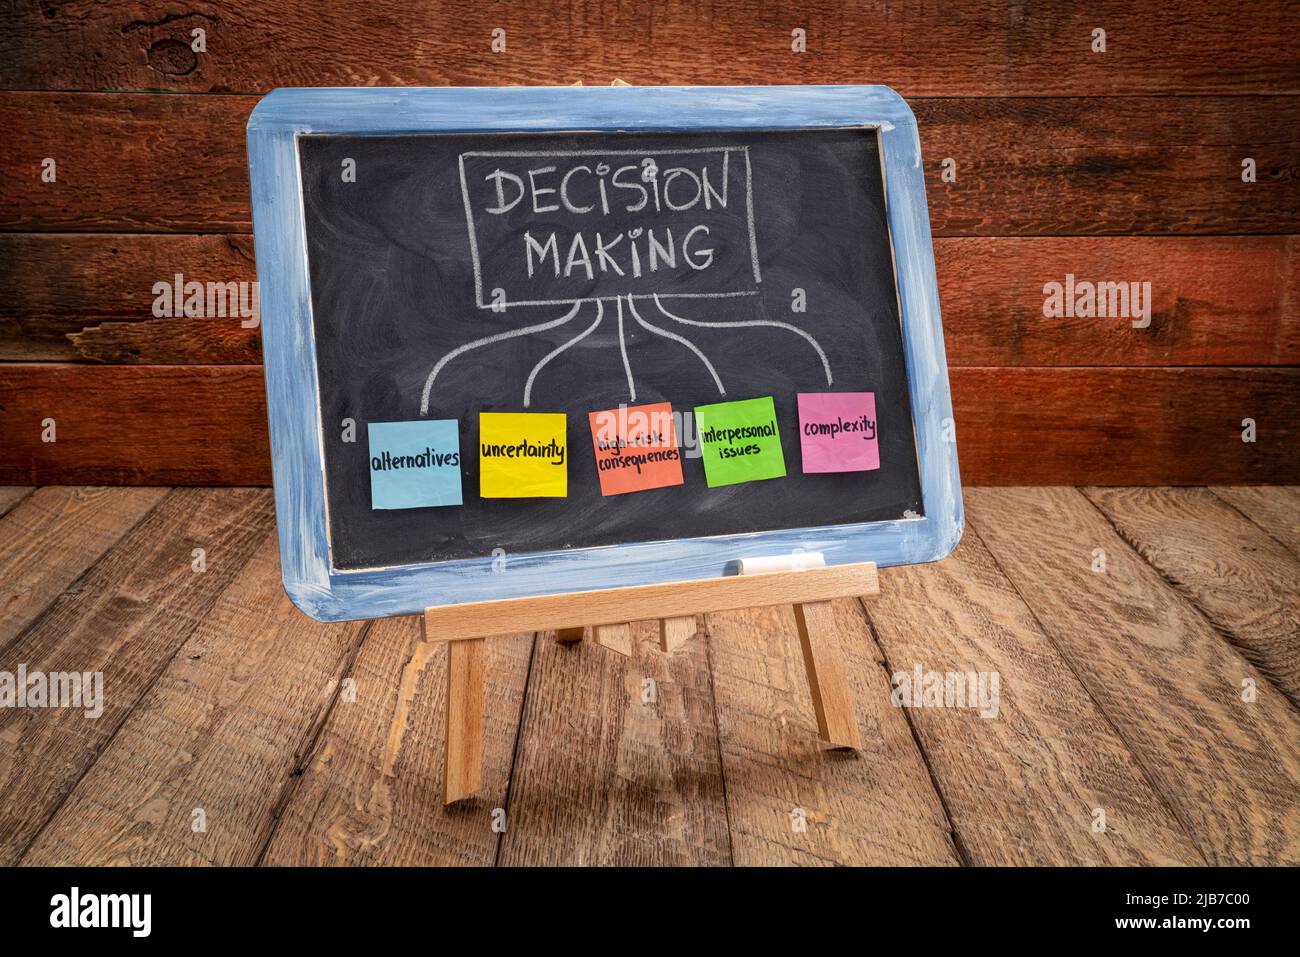 topics related to decision making process - uncertainty, alternatives, risk consequences, complexity, personal issues; white chalk handwriting and col Stock Photo